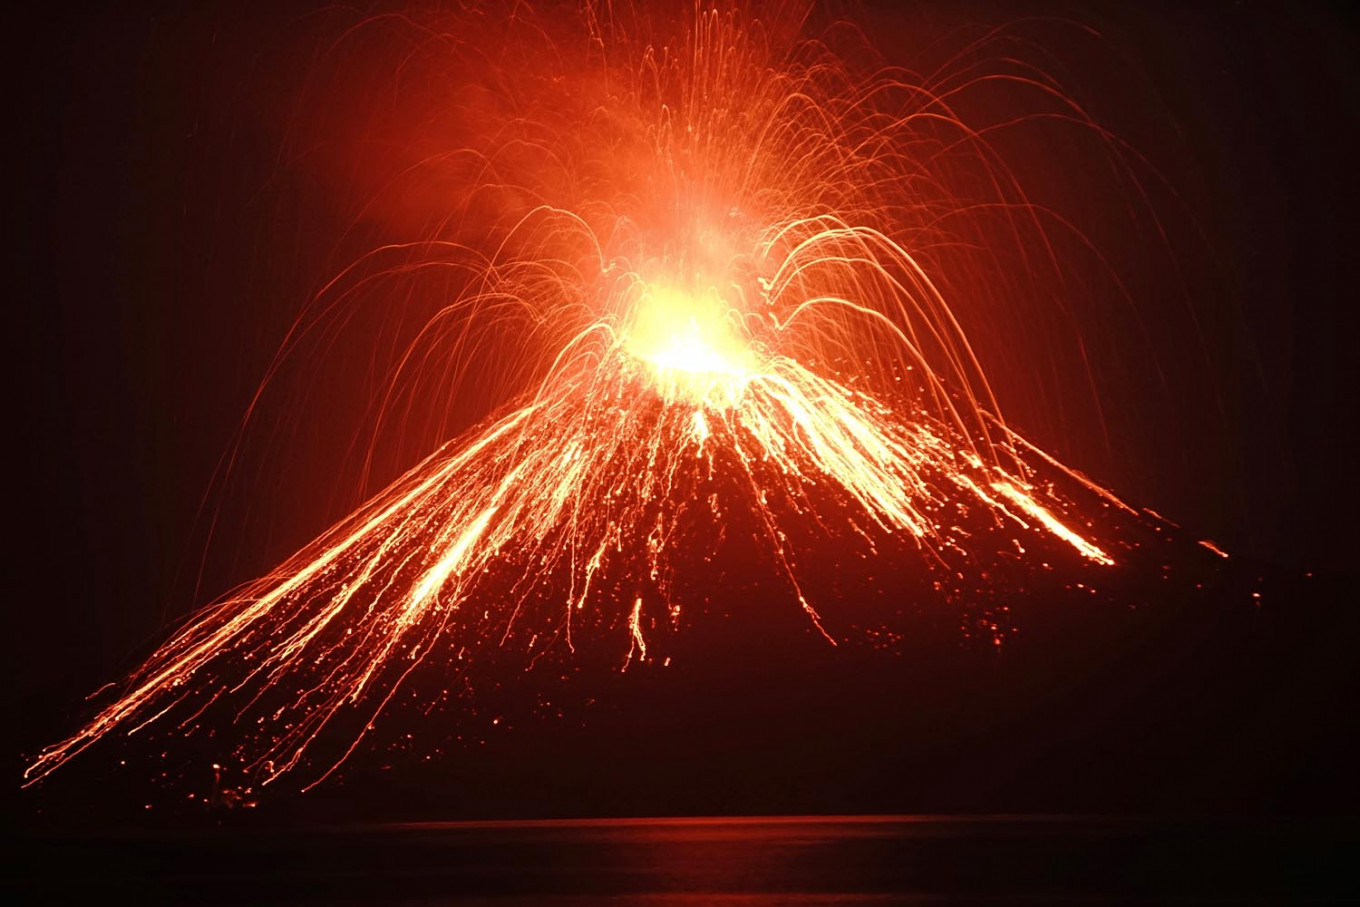 Mountains rumbling: Five most active volcanoes in Indonesia | #